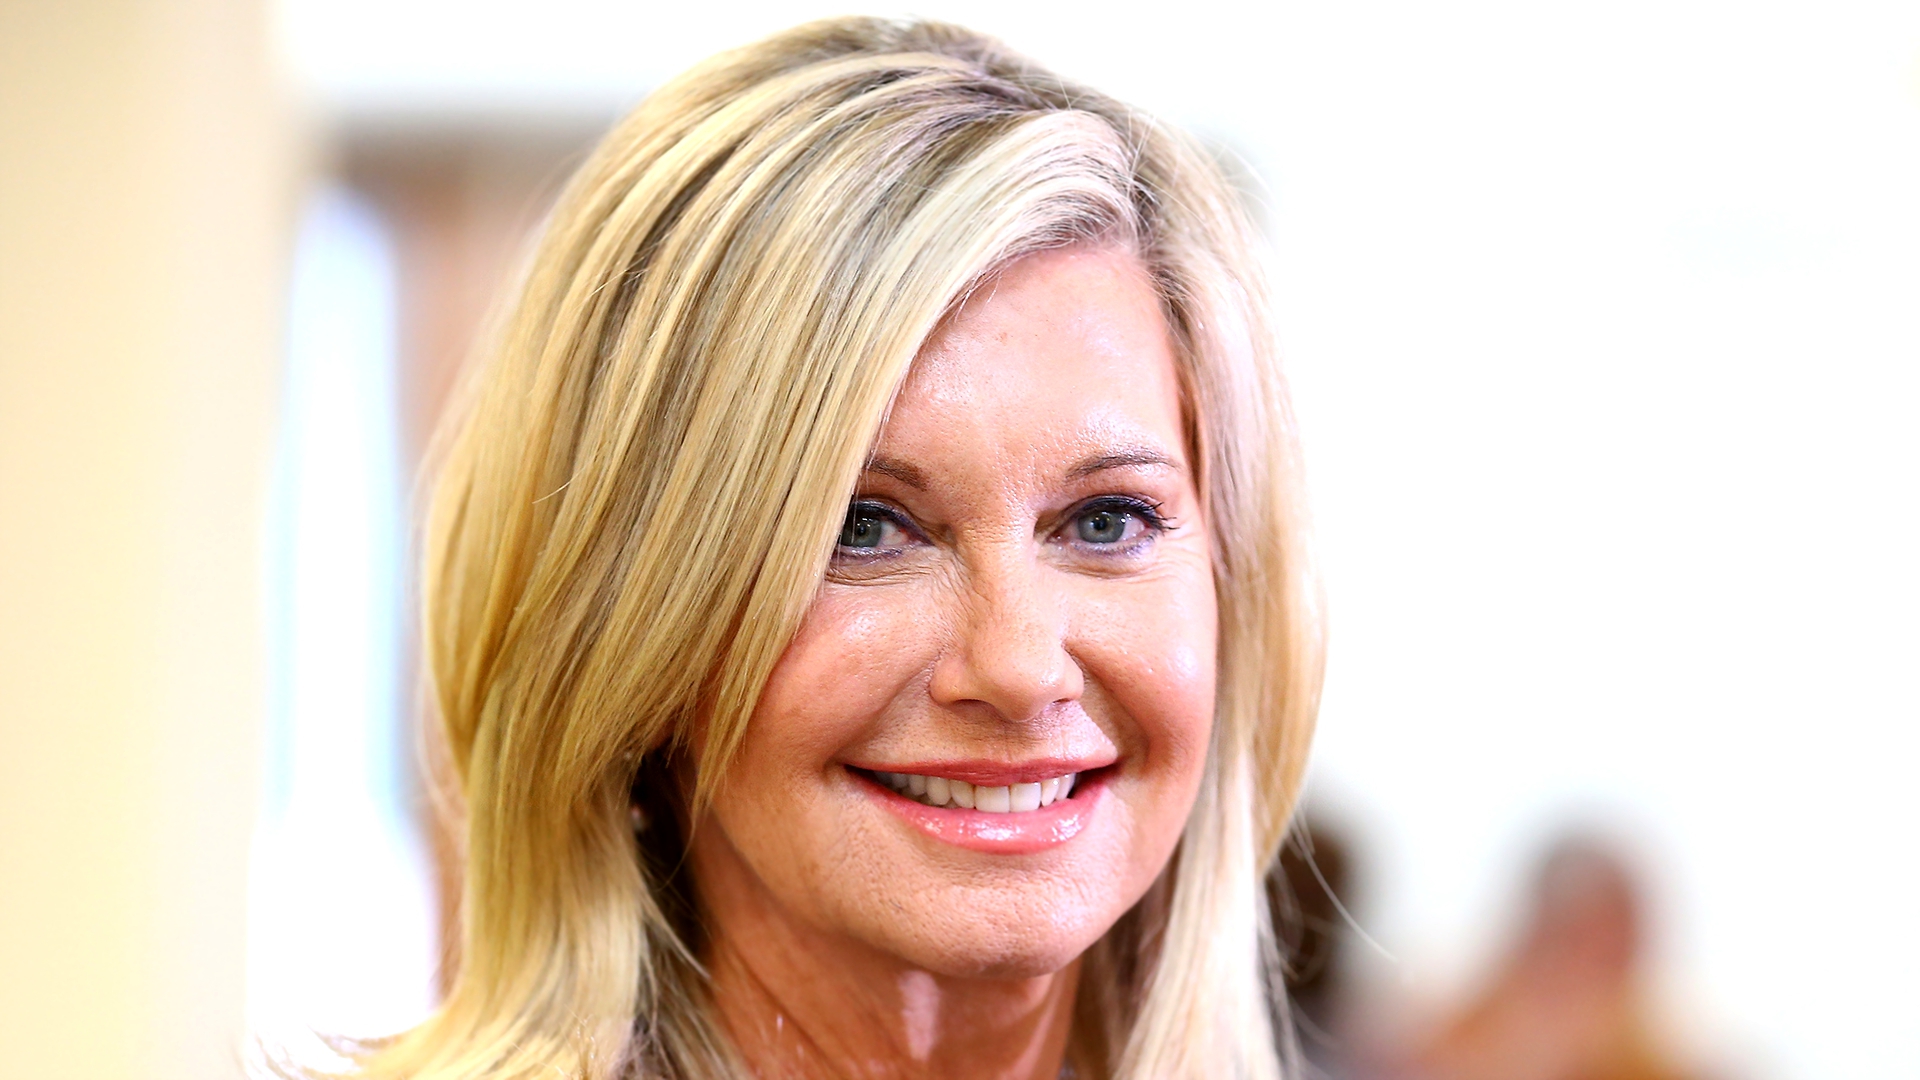 olivia newton john wallpapers for mobile on Wallpapers Bros